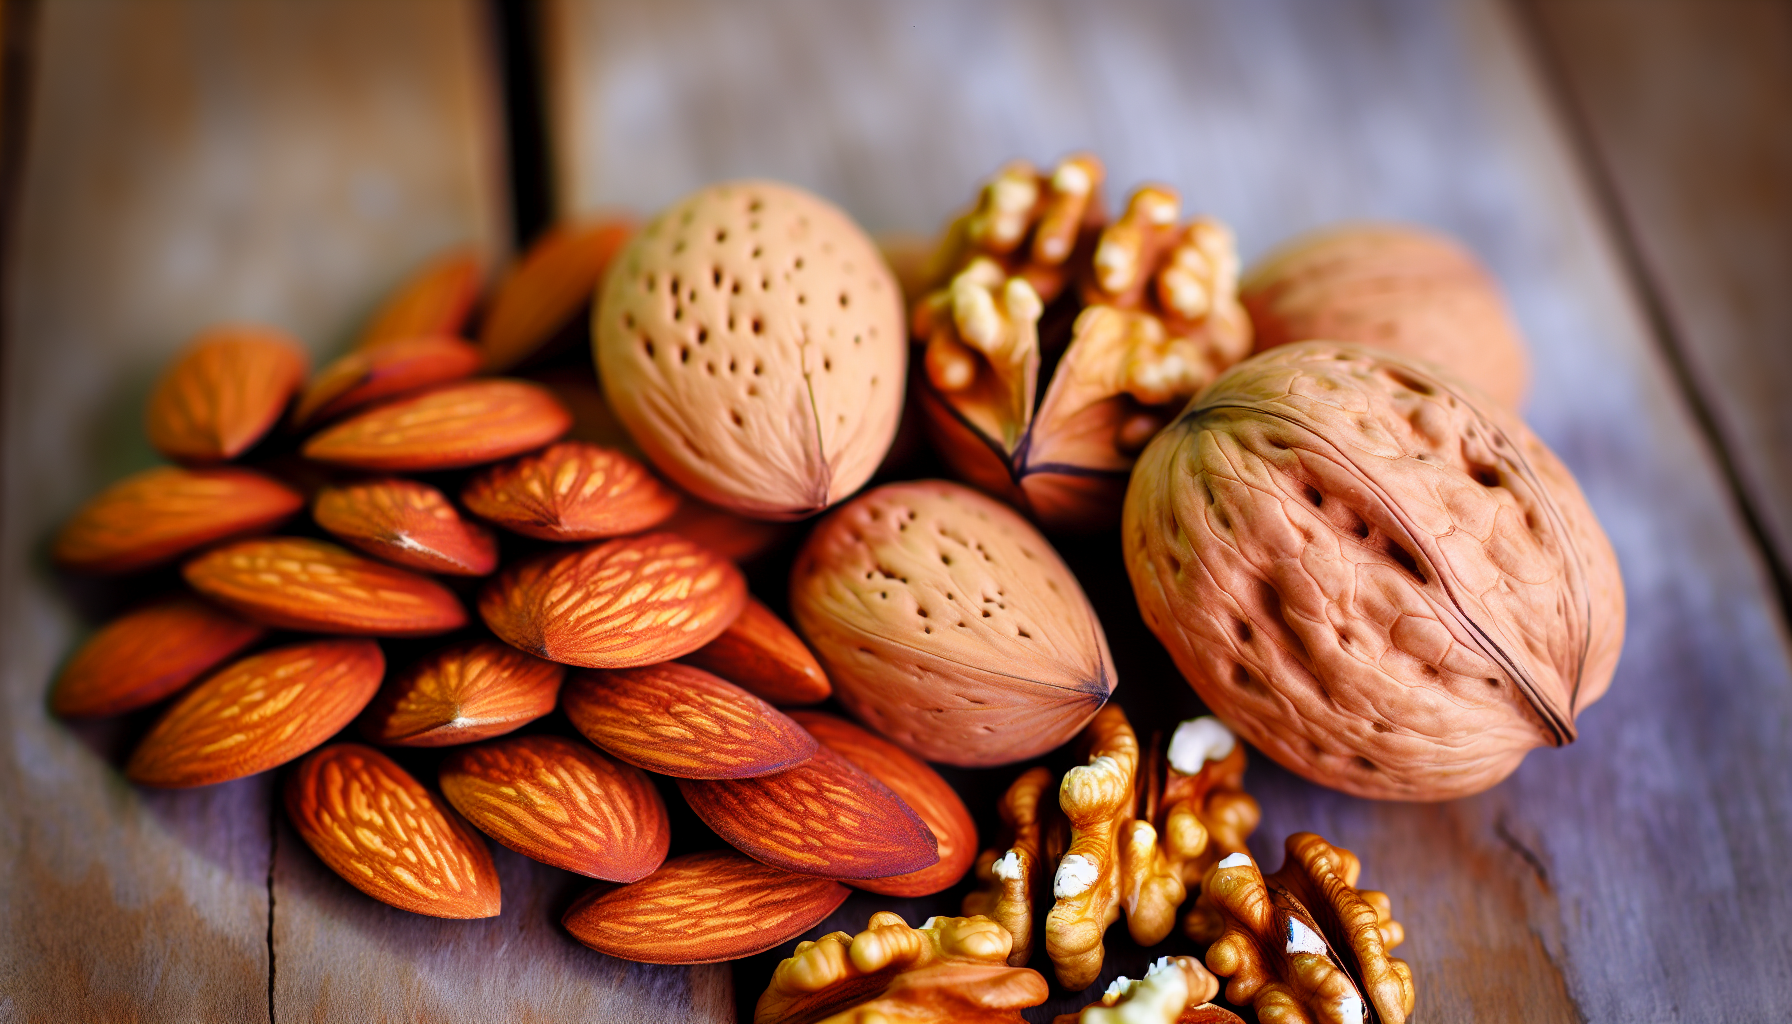 Heart-healthy nuts including almonds and walnuts